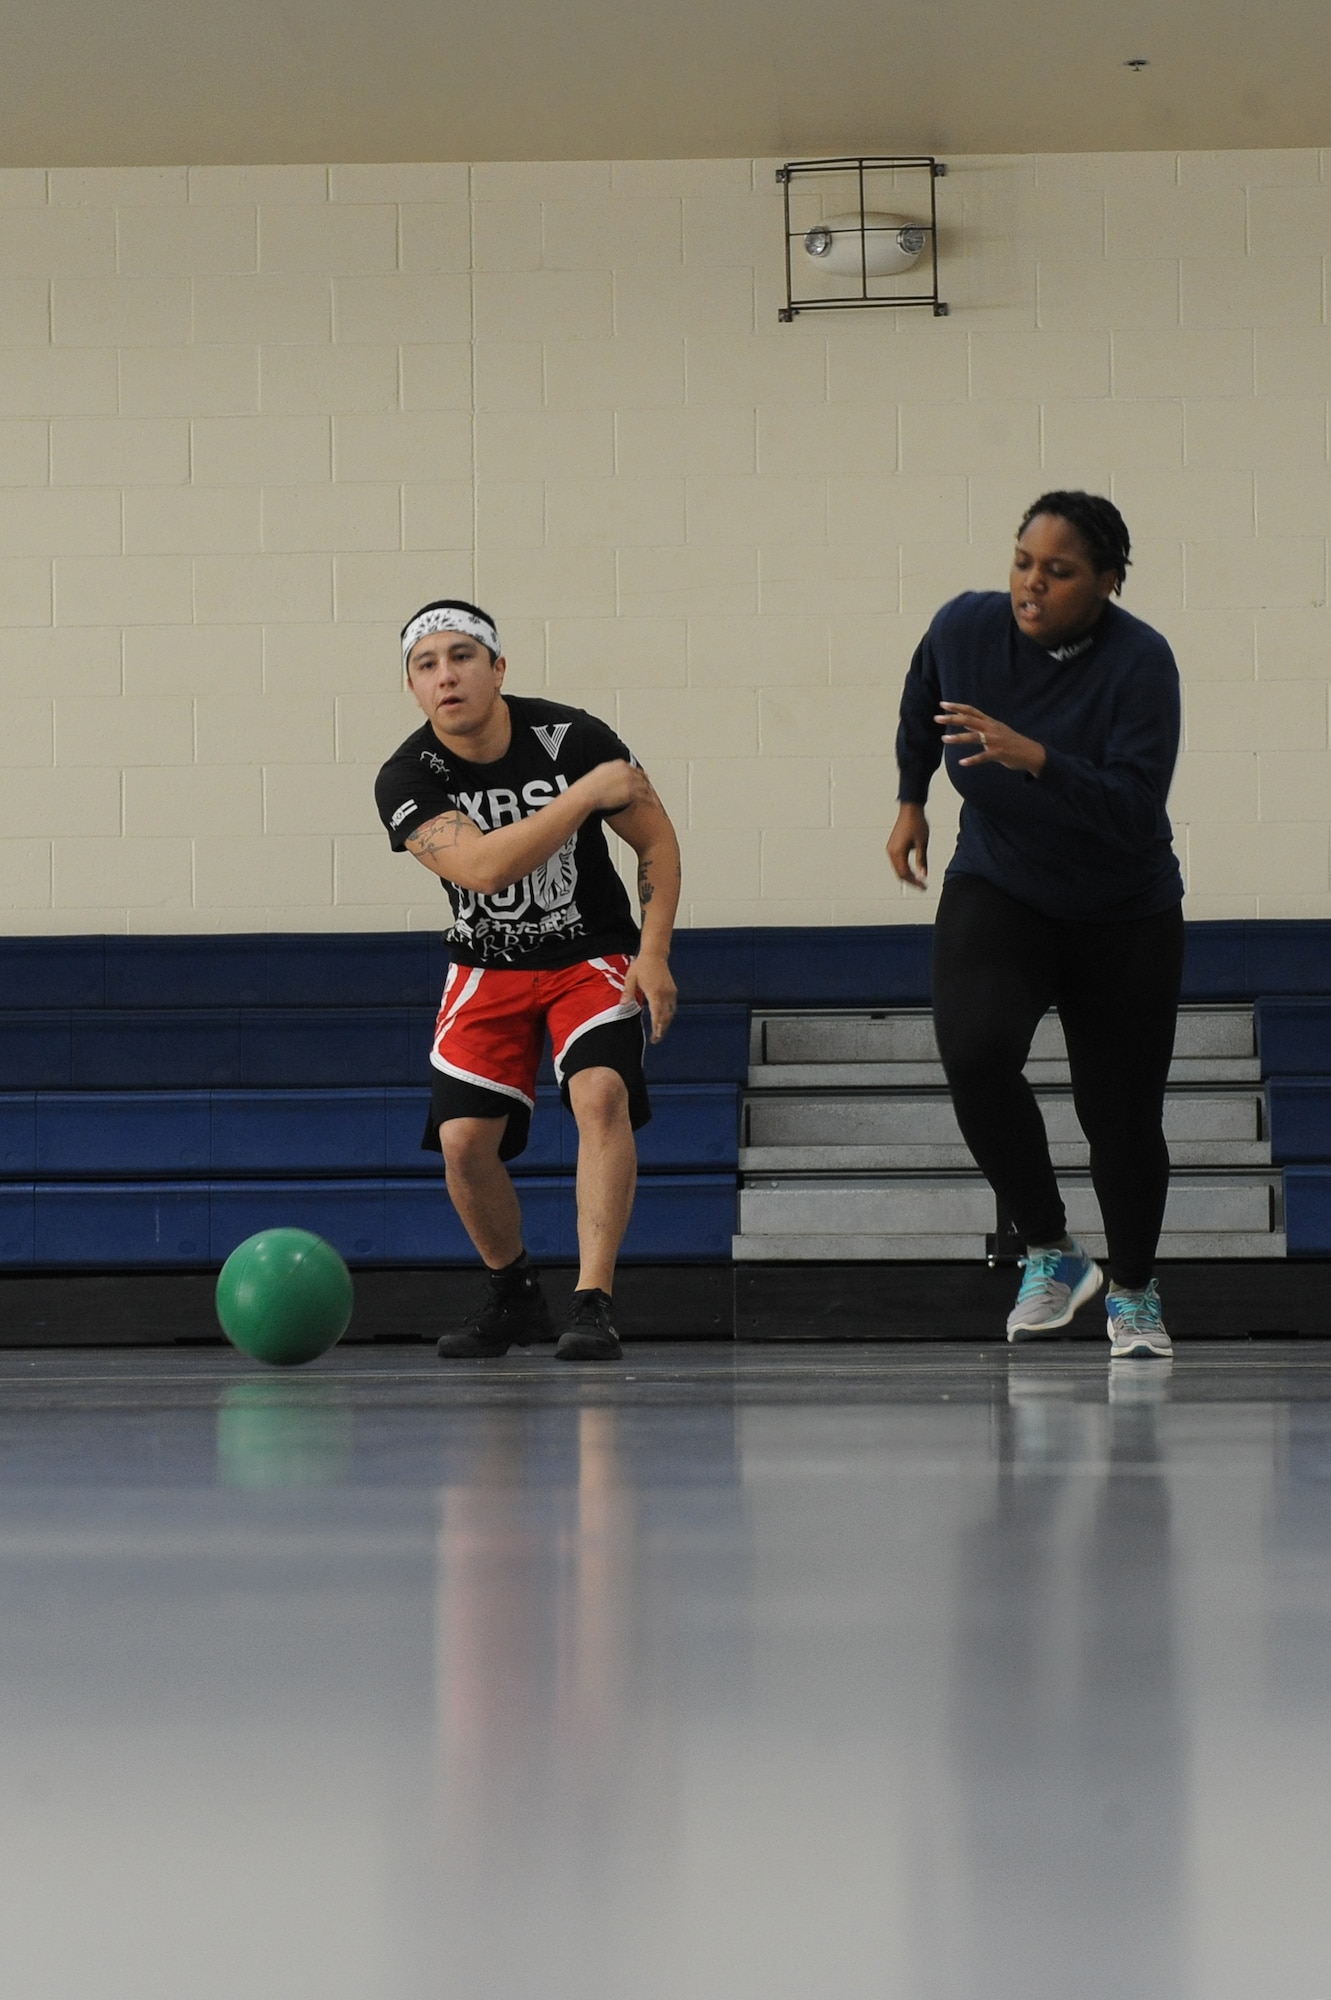 Staff Sgt. Jeremy Caudillo, 2nd Force Support Squadron fitness center supervisor, does an exercise drill with Staff Sgt. Crystal McElvane, 2 FSS unit deployment manager, on Barksdale Air Force Base, La., Dec. 20. During the drill, a ball is rolled and the other individual must run and retrieve it. The process is repeated for one minute to improve cardio. Caudillo competes in mixed martial arts and uses some of the exercises he learns to help Airmen stay fit to fight. (U.S. Air Force photo/Senior Airman Micaiah Anthony)